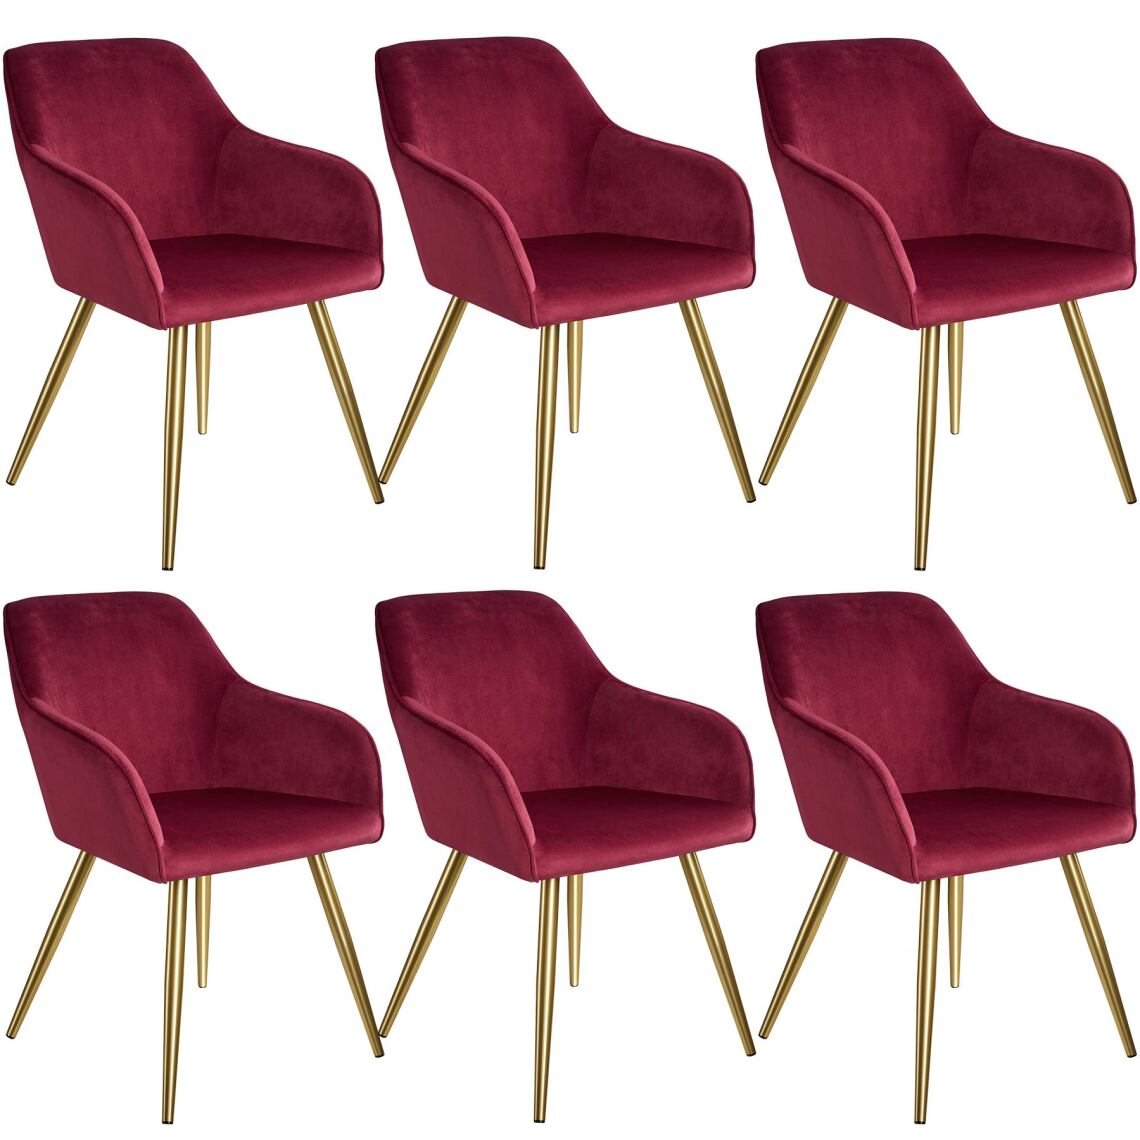 Tectake - 6 Chaises MARILYN Effet Velours Style Scandinave - bordeaux/or - Chaises